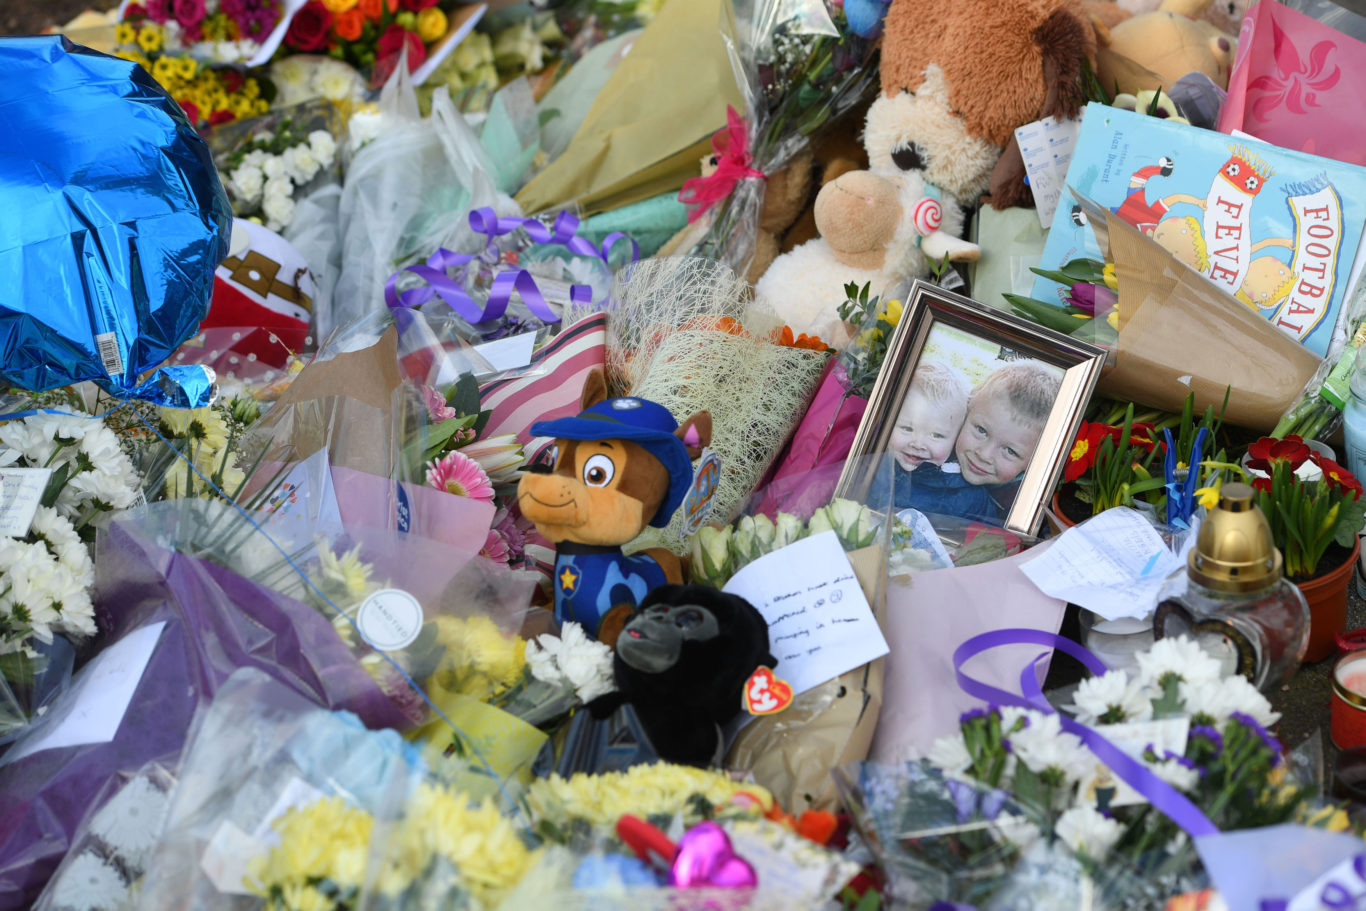 Flowers close to the scene where brothers Corey Platt-May and Casper, aged six and two, were killed (Joe Giddens/PA)